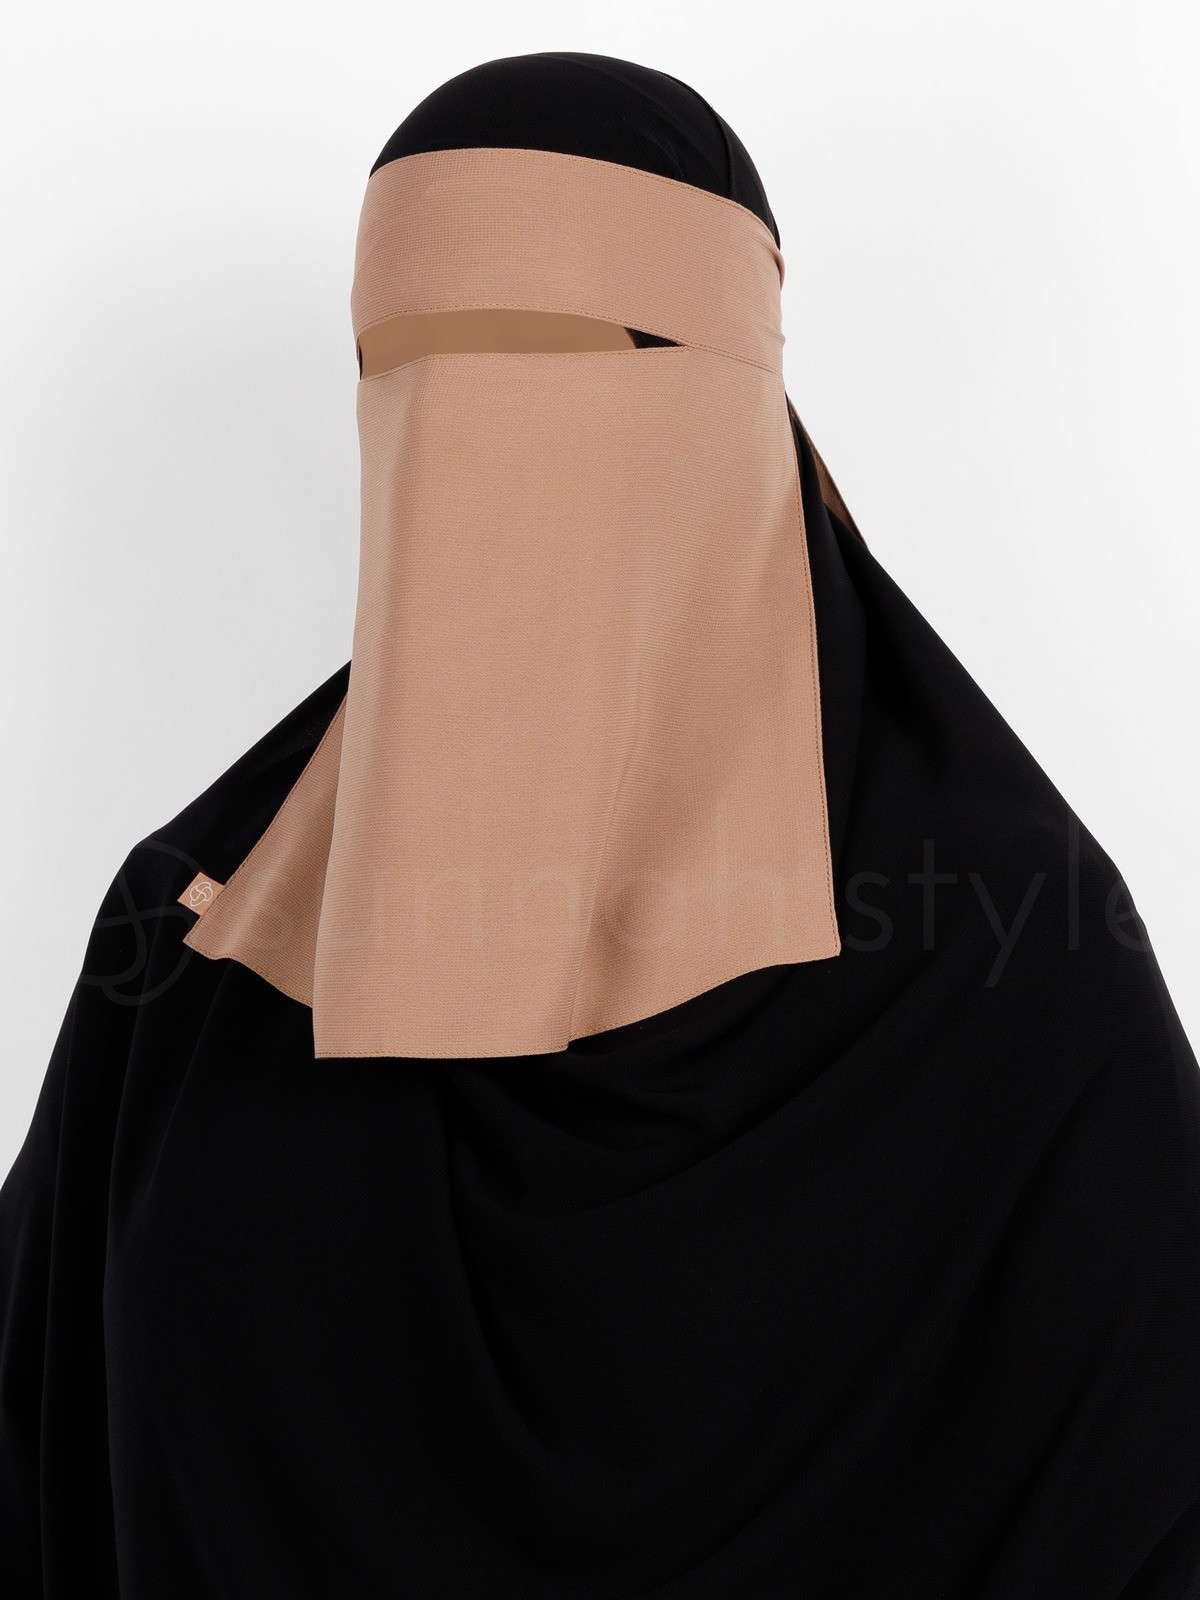 Sunnah Style - Short One Layer Niqab (Toffee)